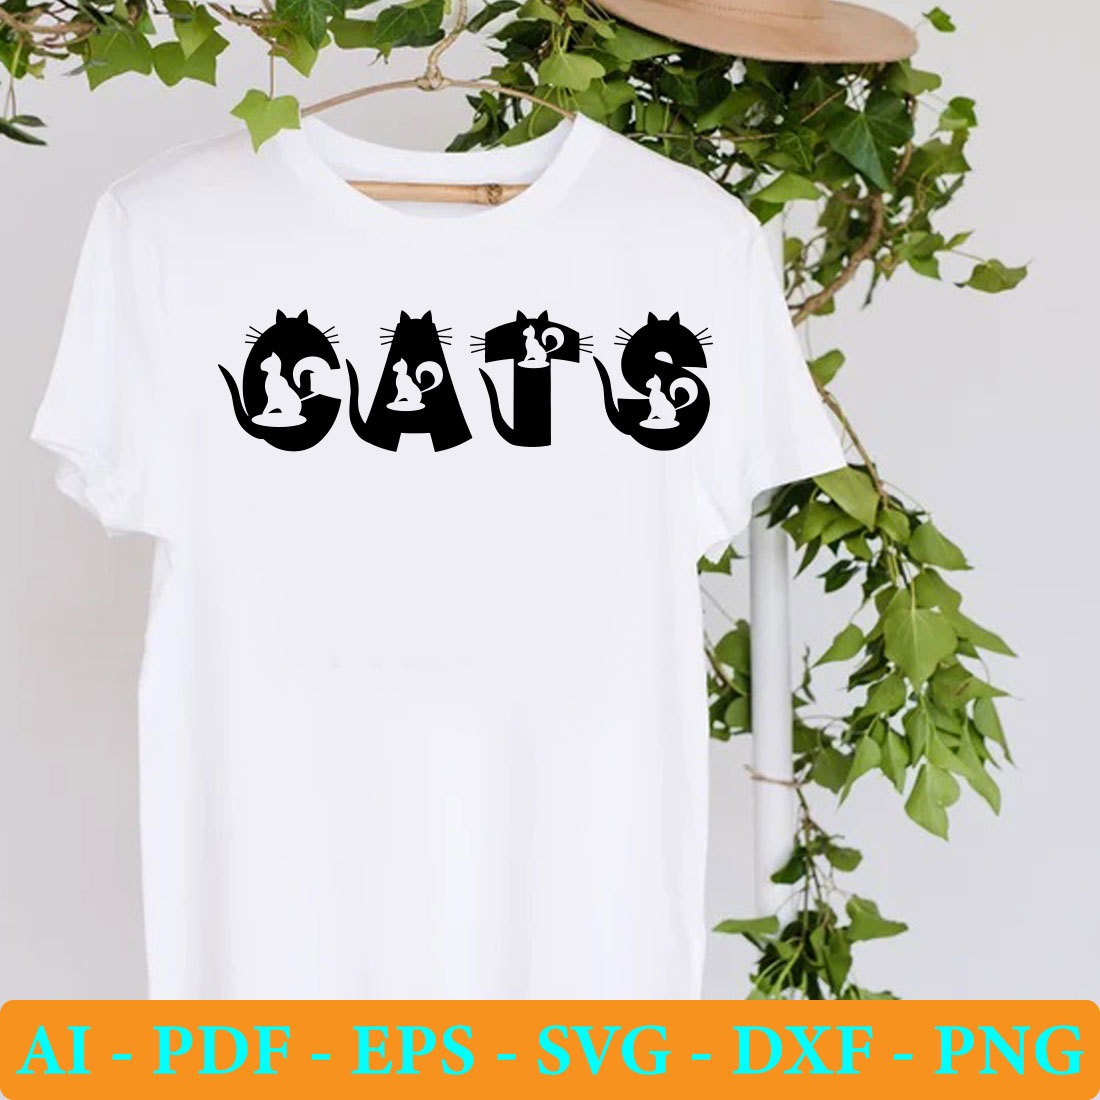 White t - shirt with black cats on it.